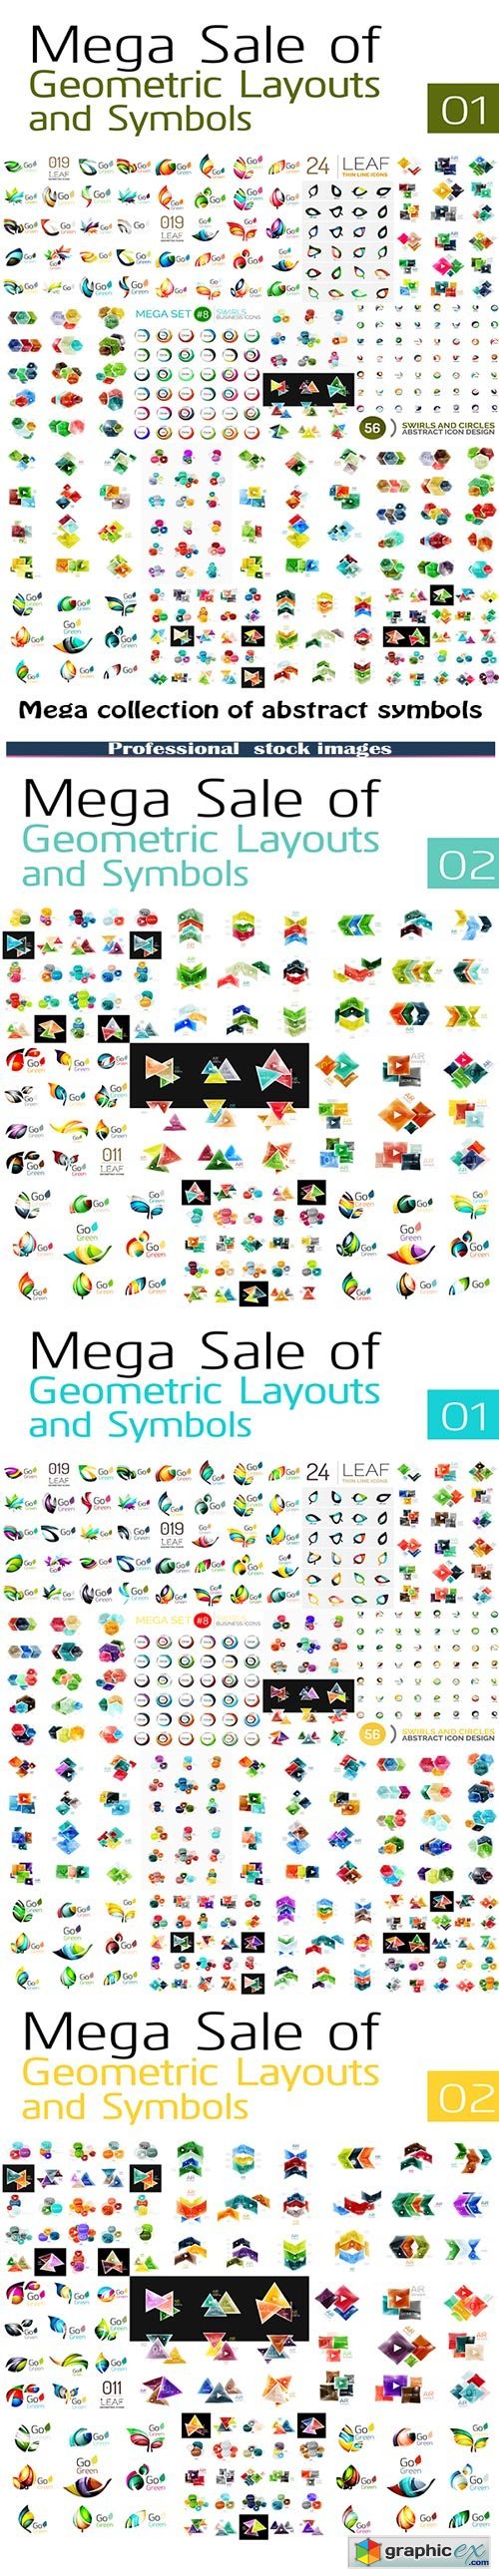 Mega collection of abstract symbols